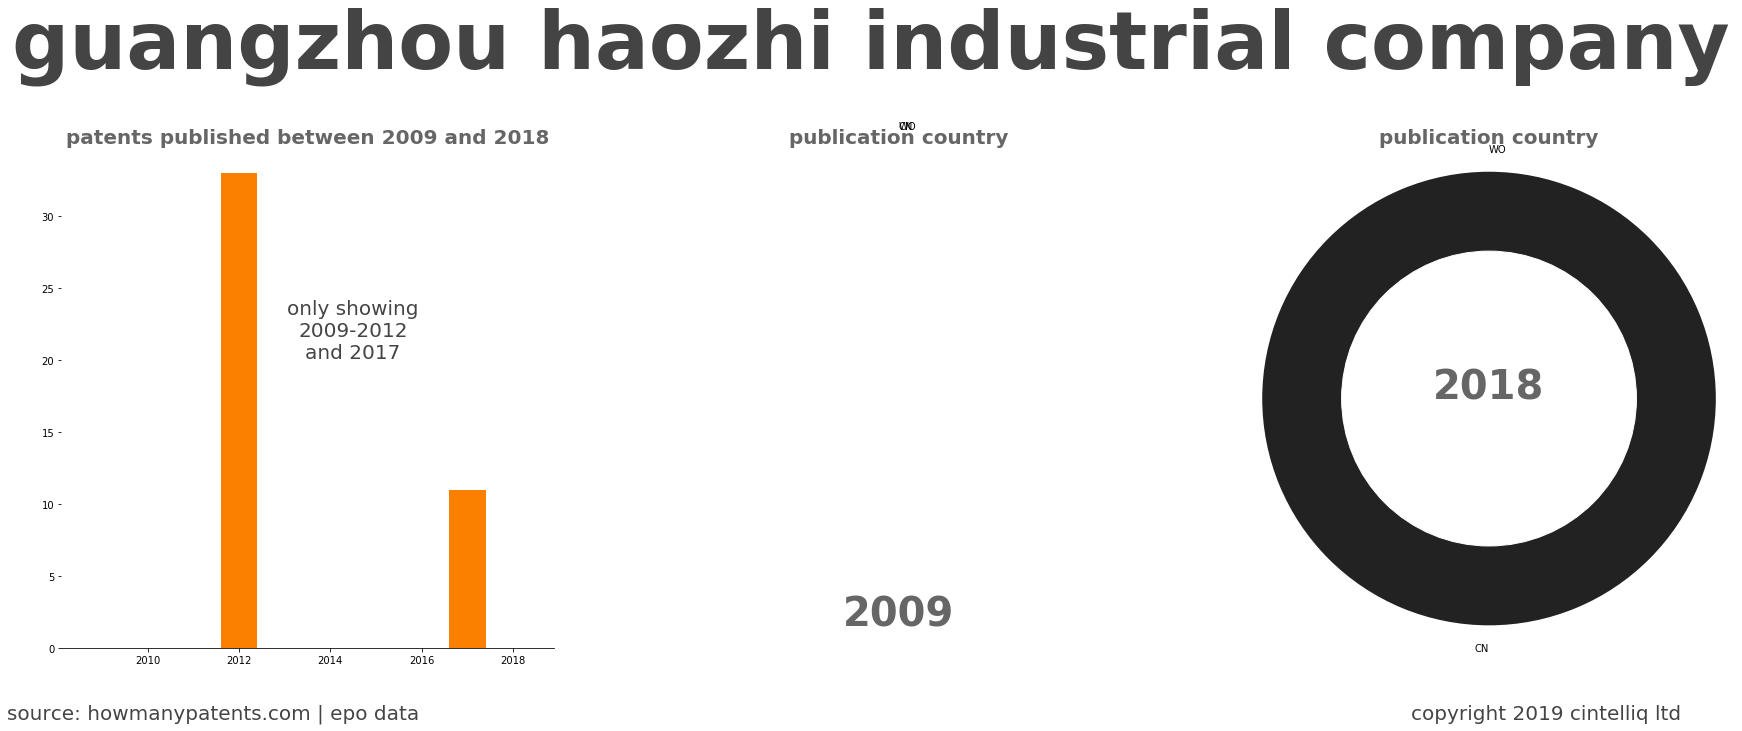 summary of patents for Guangzhou Haozhi Industrial Company